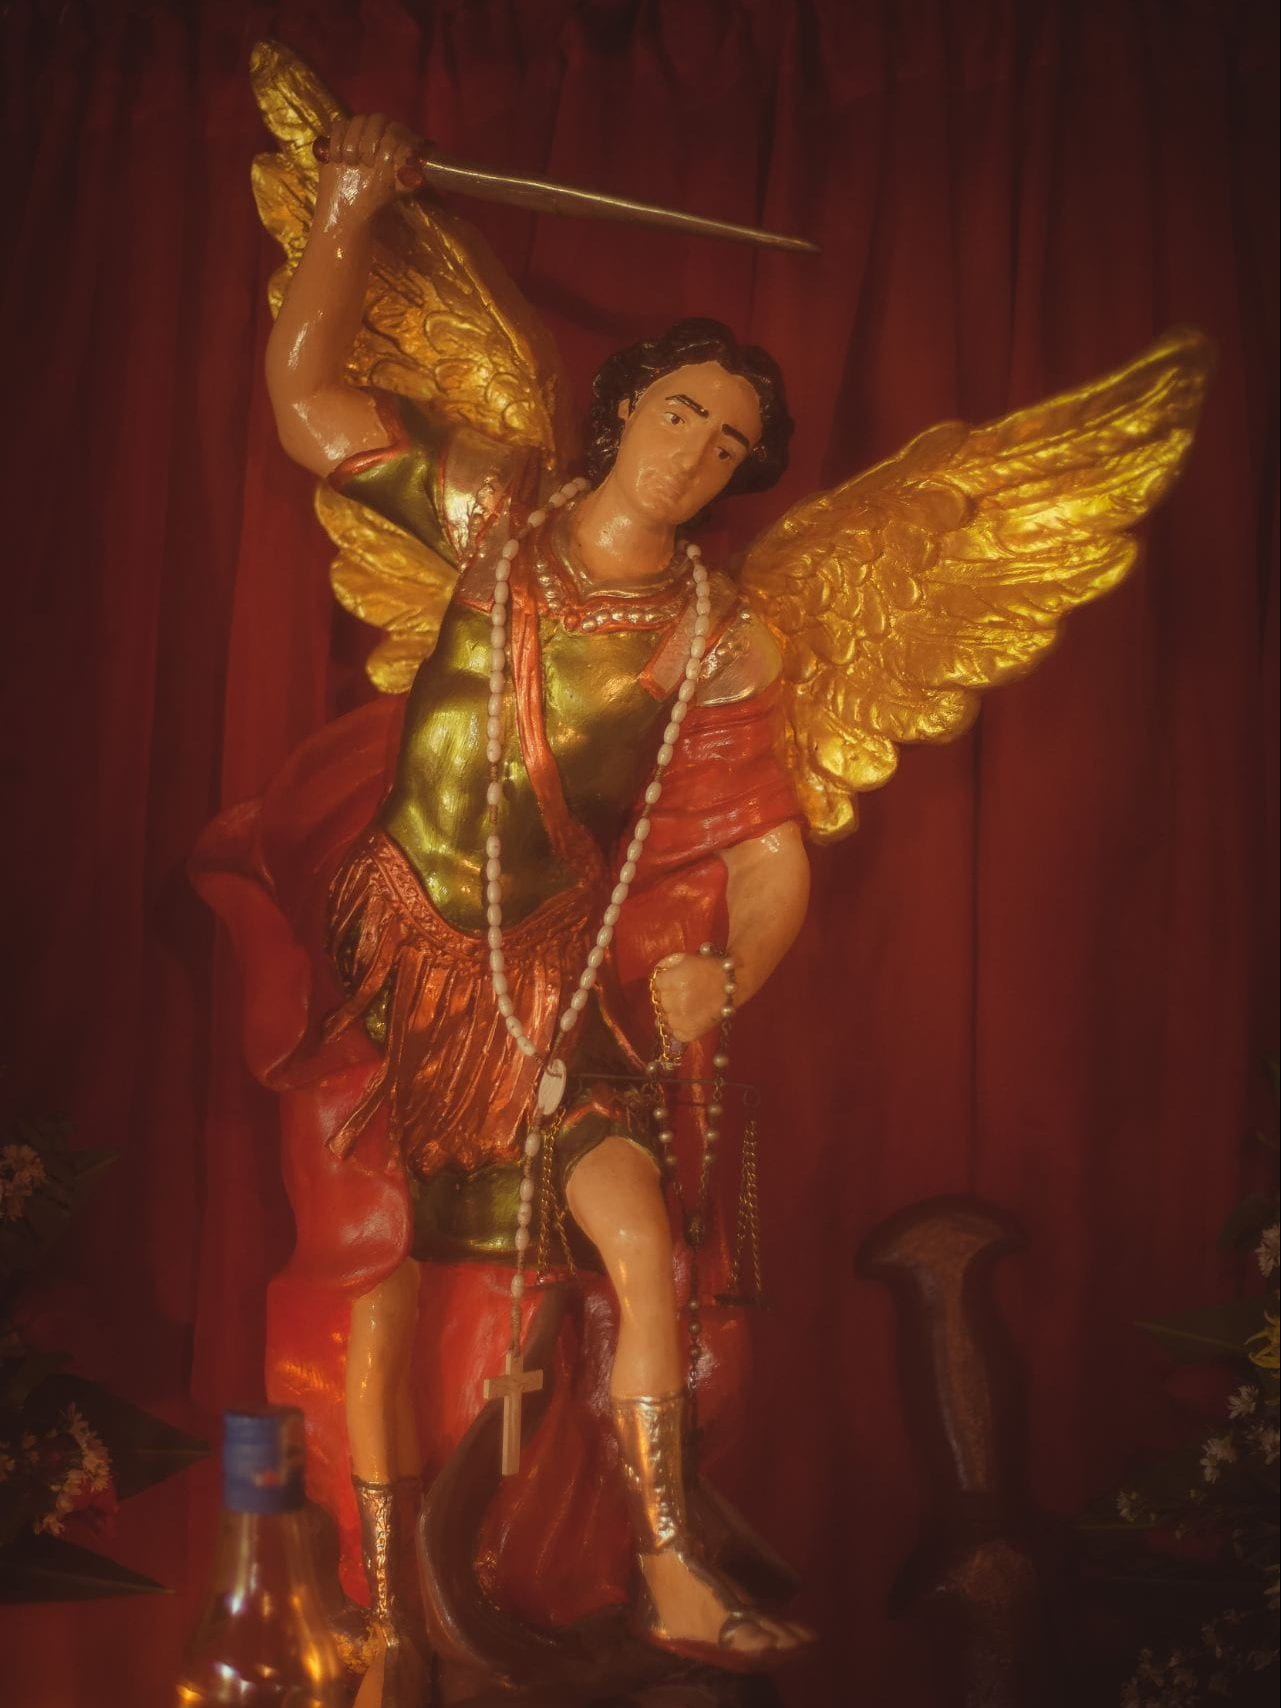 A statue of a masculine figure with gold wings and armor, holding a sword overhead.